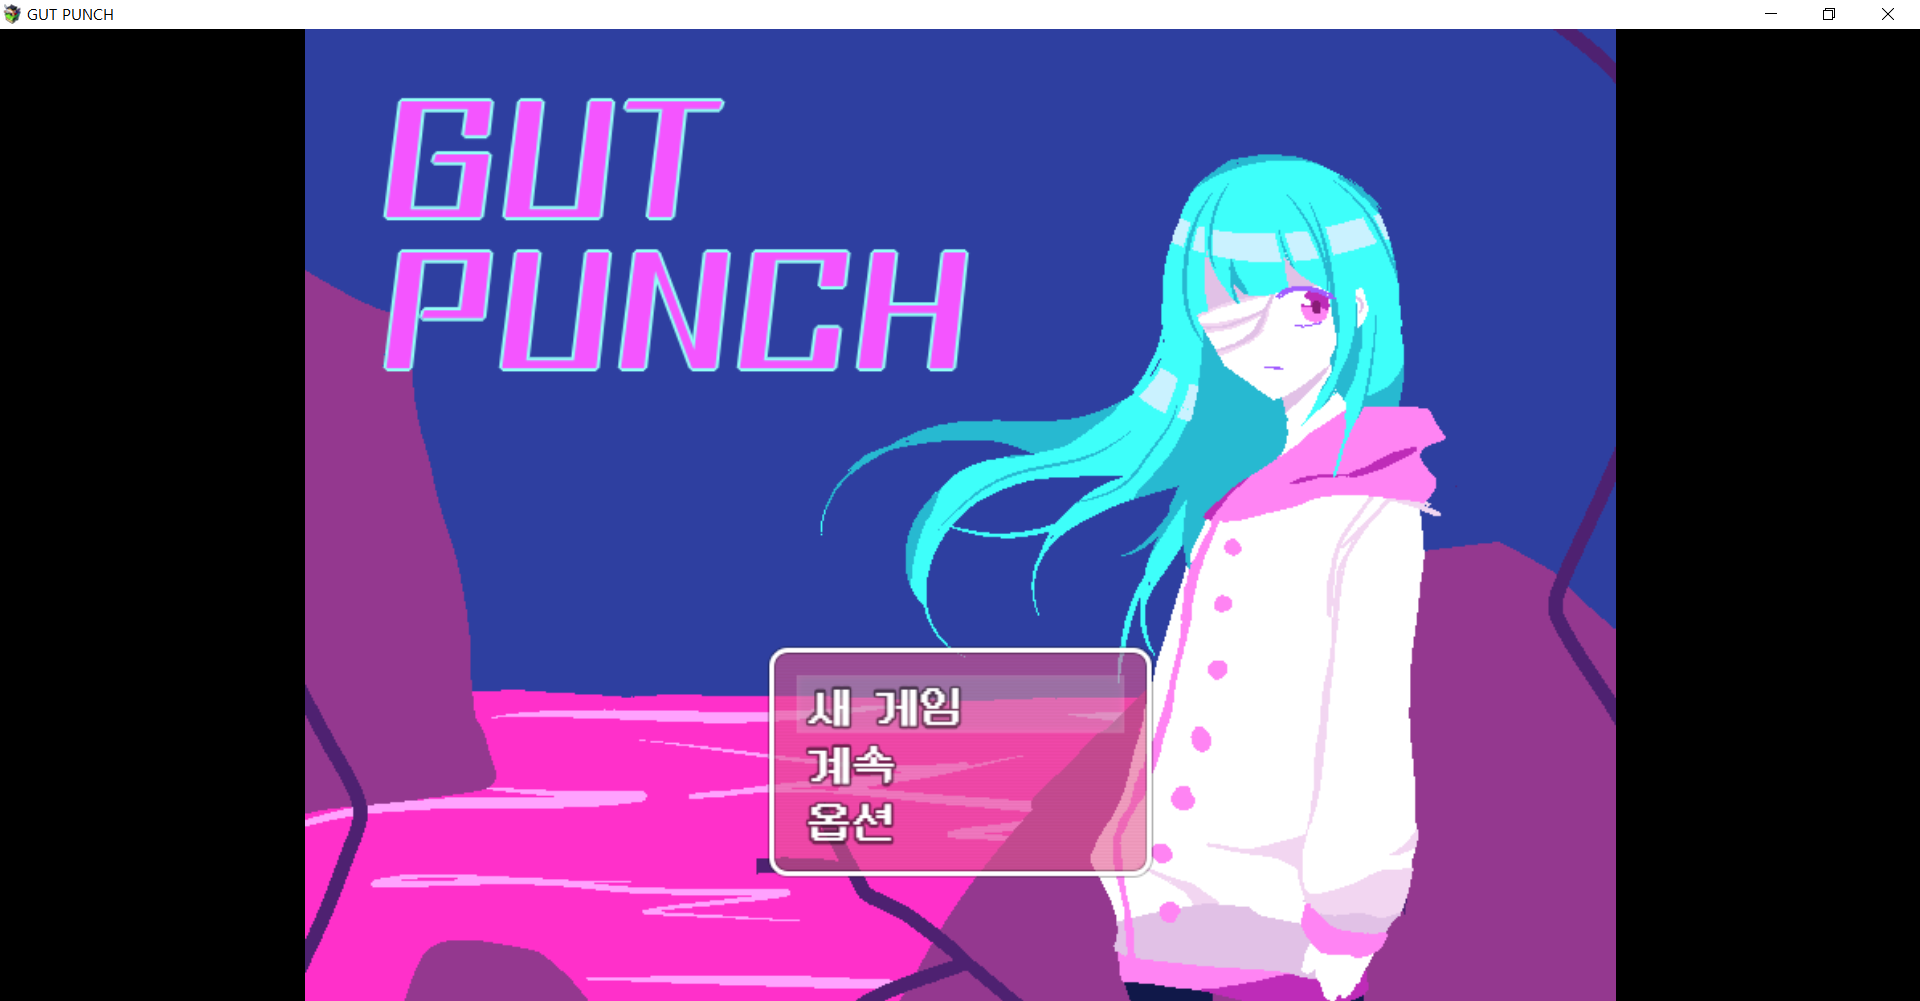 GUT PUNCH 2021-12-10 오전 2_53_50.png